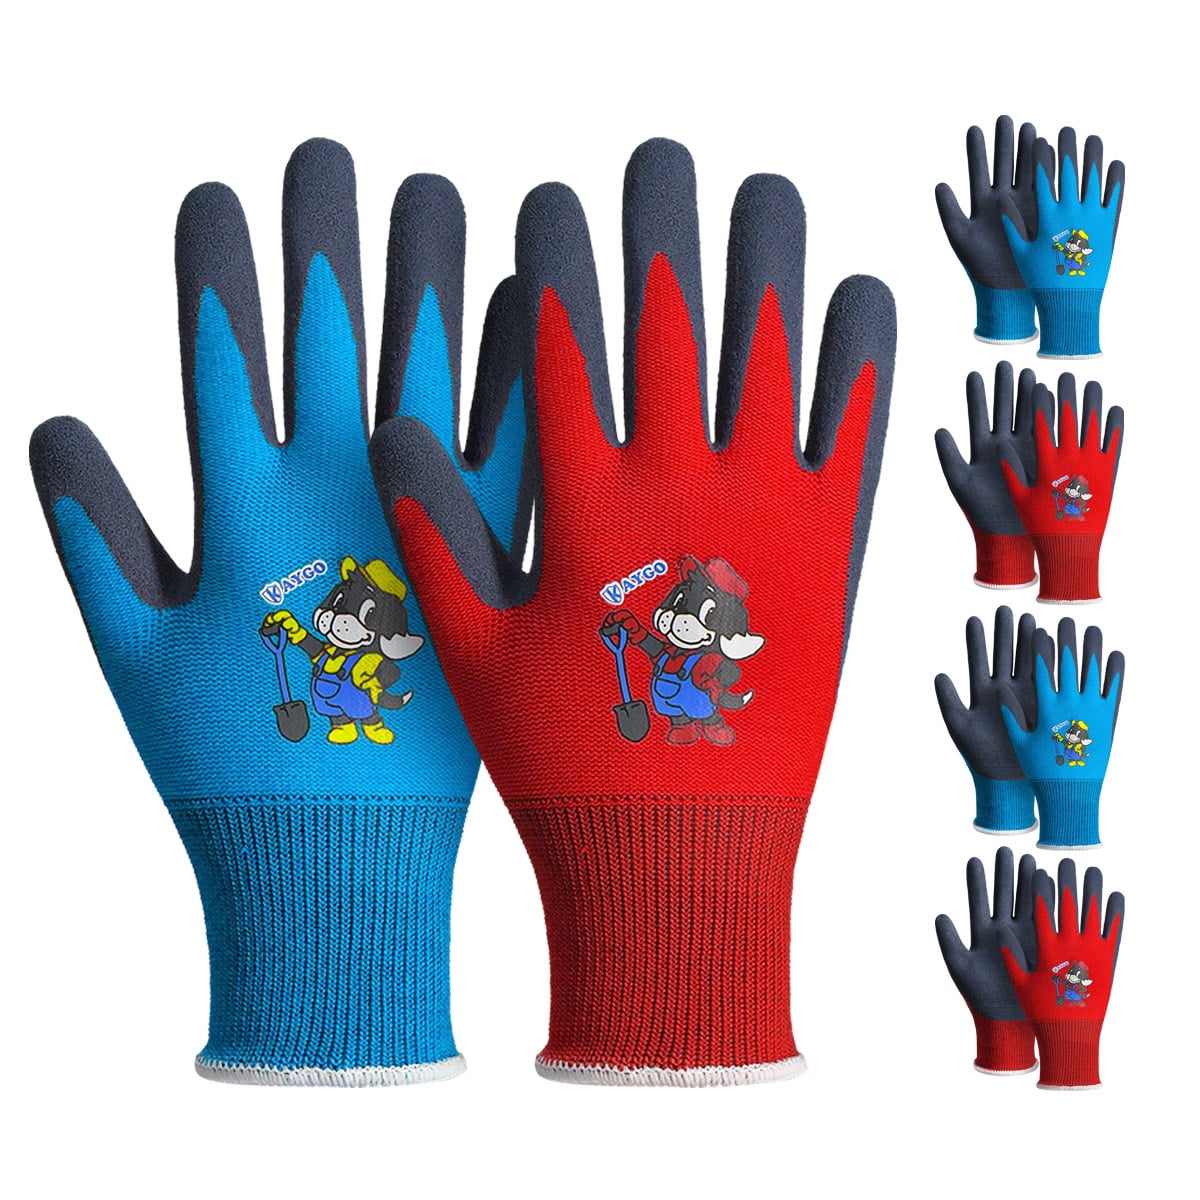 KAYGO Kids Gardening Gloves 4 Pairs - Polyester Seemless Knitted with Latex Sandy Finish Coating, KGKID100, Ideal for Kids Gardening, Diy,Light Duty